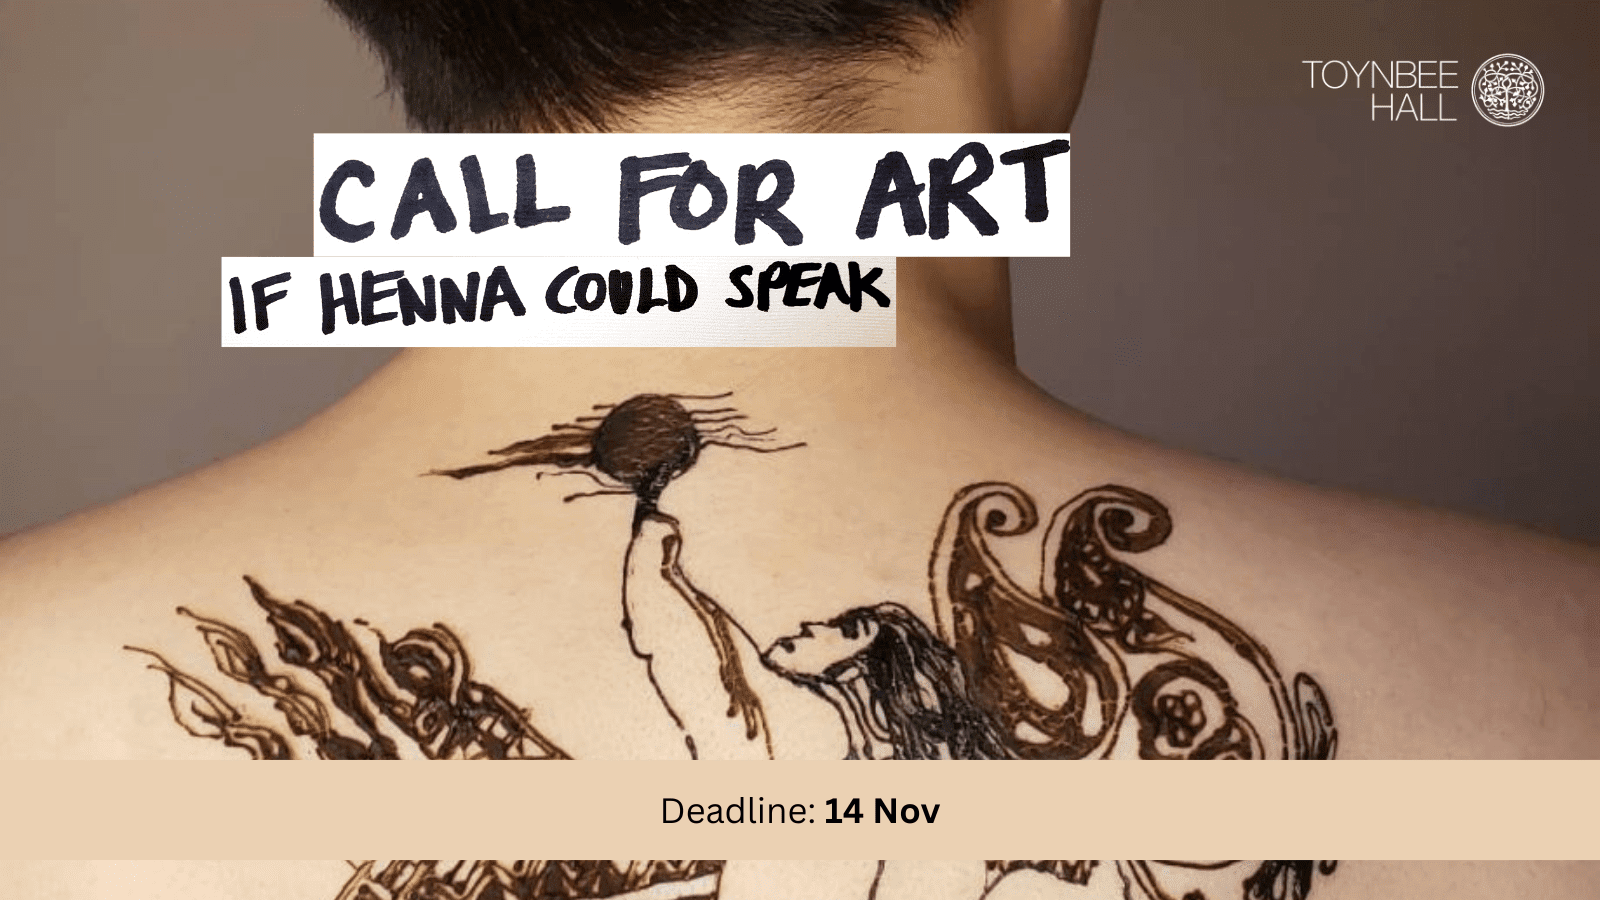 Call for Art: If Henna Could Speak - image of henna tattoo on person's back